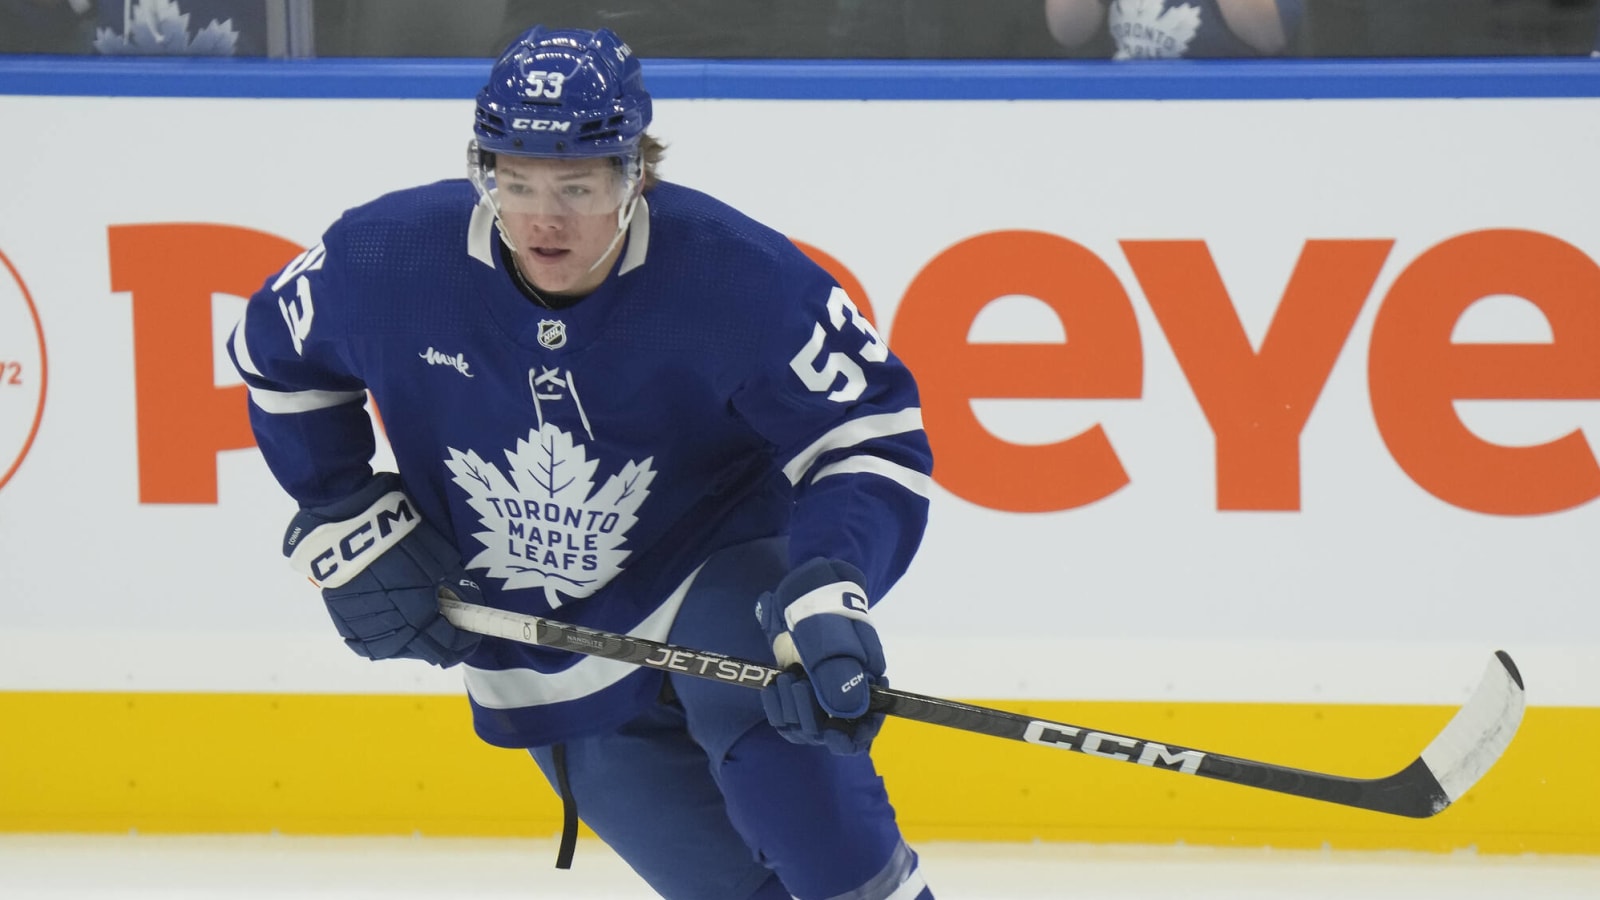 Watch: Leafs prospect Easton Cowan scores goal, chirps back at heckling fan in Knights playoff game